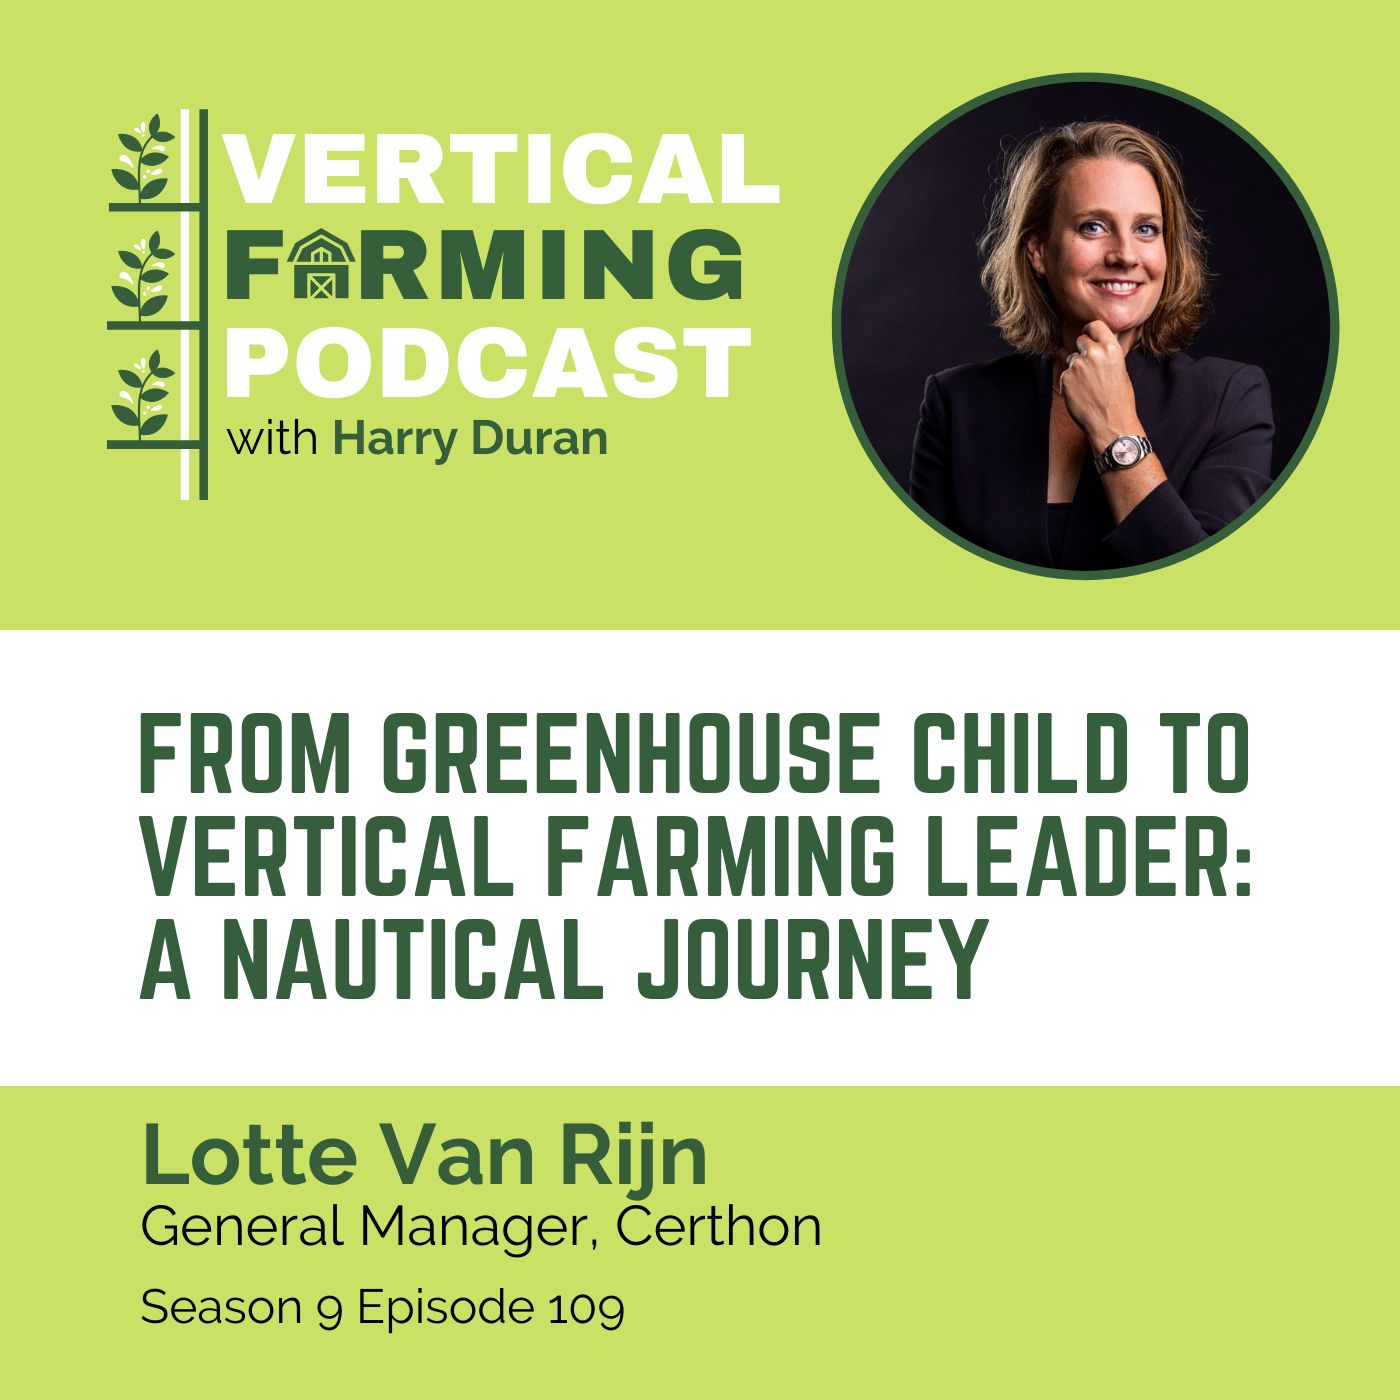 S9E109: Lotte Van Rijn / Certhon - From Greenhouse Child to Vertical Farming Leader: A Nautical Journey